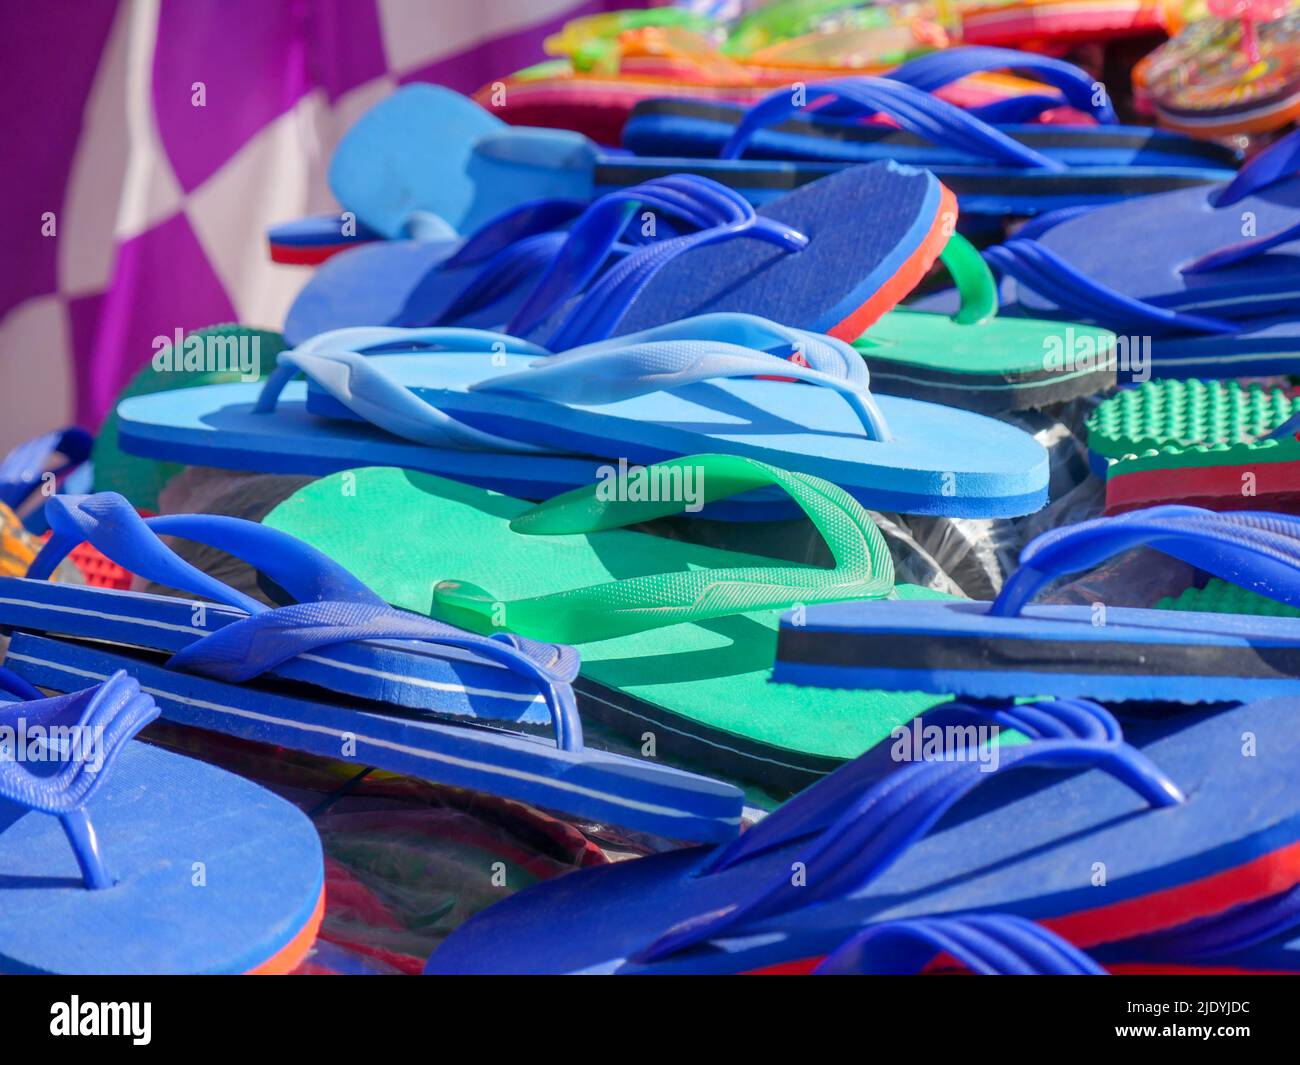 Pile of slippers at street stall. Slippers also called as hawai chappal in India. Stock Photo